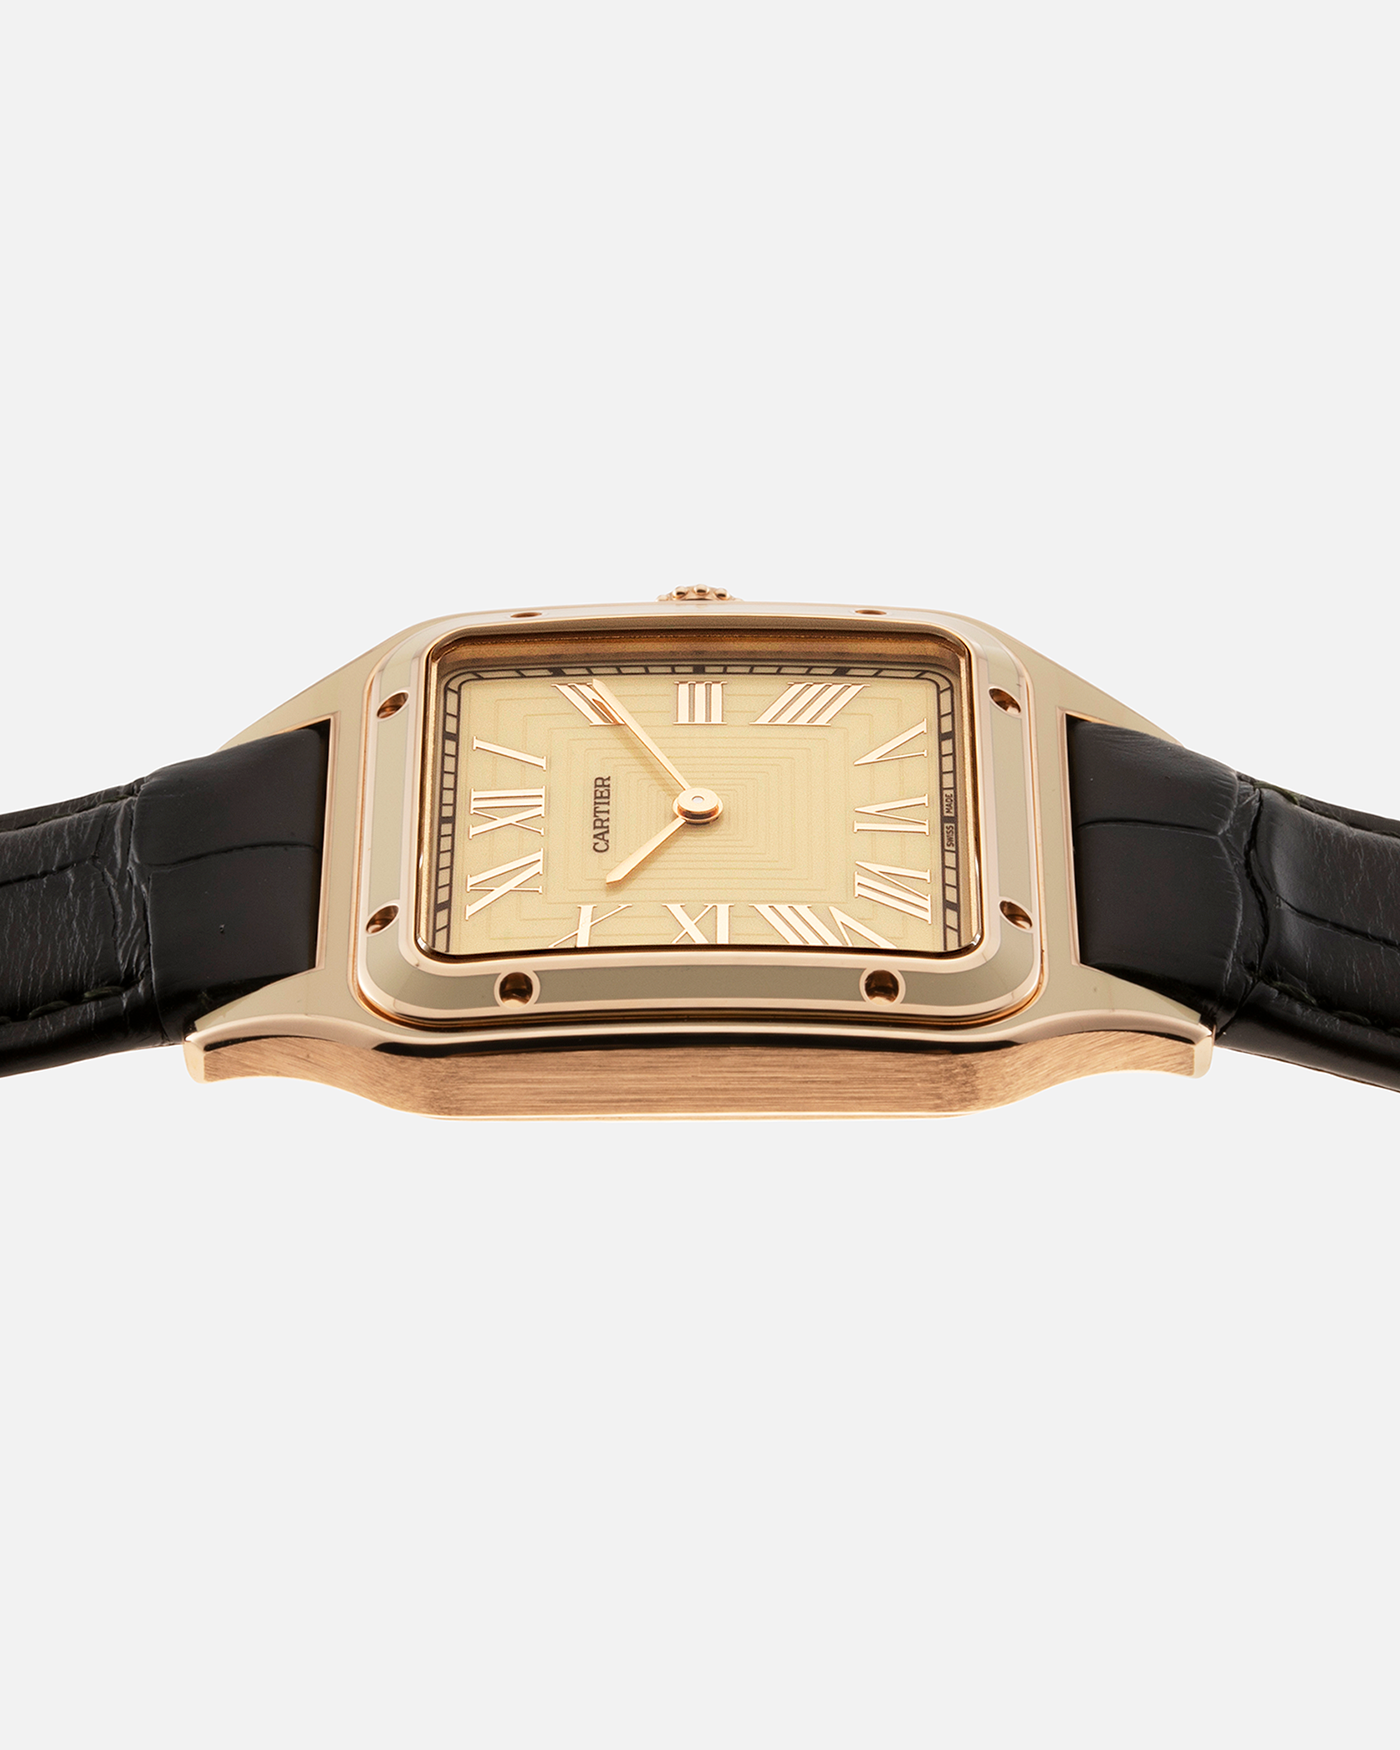 Brand: Cartier Year: 2023 Model: Santos-Dumont Large Material: 18-carat Rose Gold, Beige Lacquer Movement: Cartier Cal. 430 MC, Manual-Winding Case Diameter: 43.5mm x 31.4mm Bracelet / Strap: Cartier Black Alligator Leather Strap with Signed 18-carat Rose Gold Tang Buckle